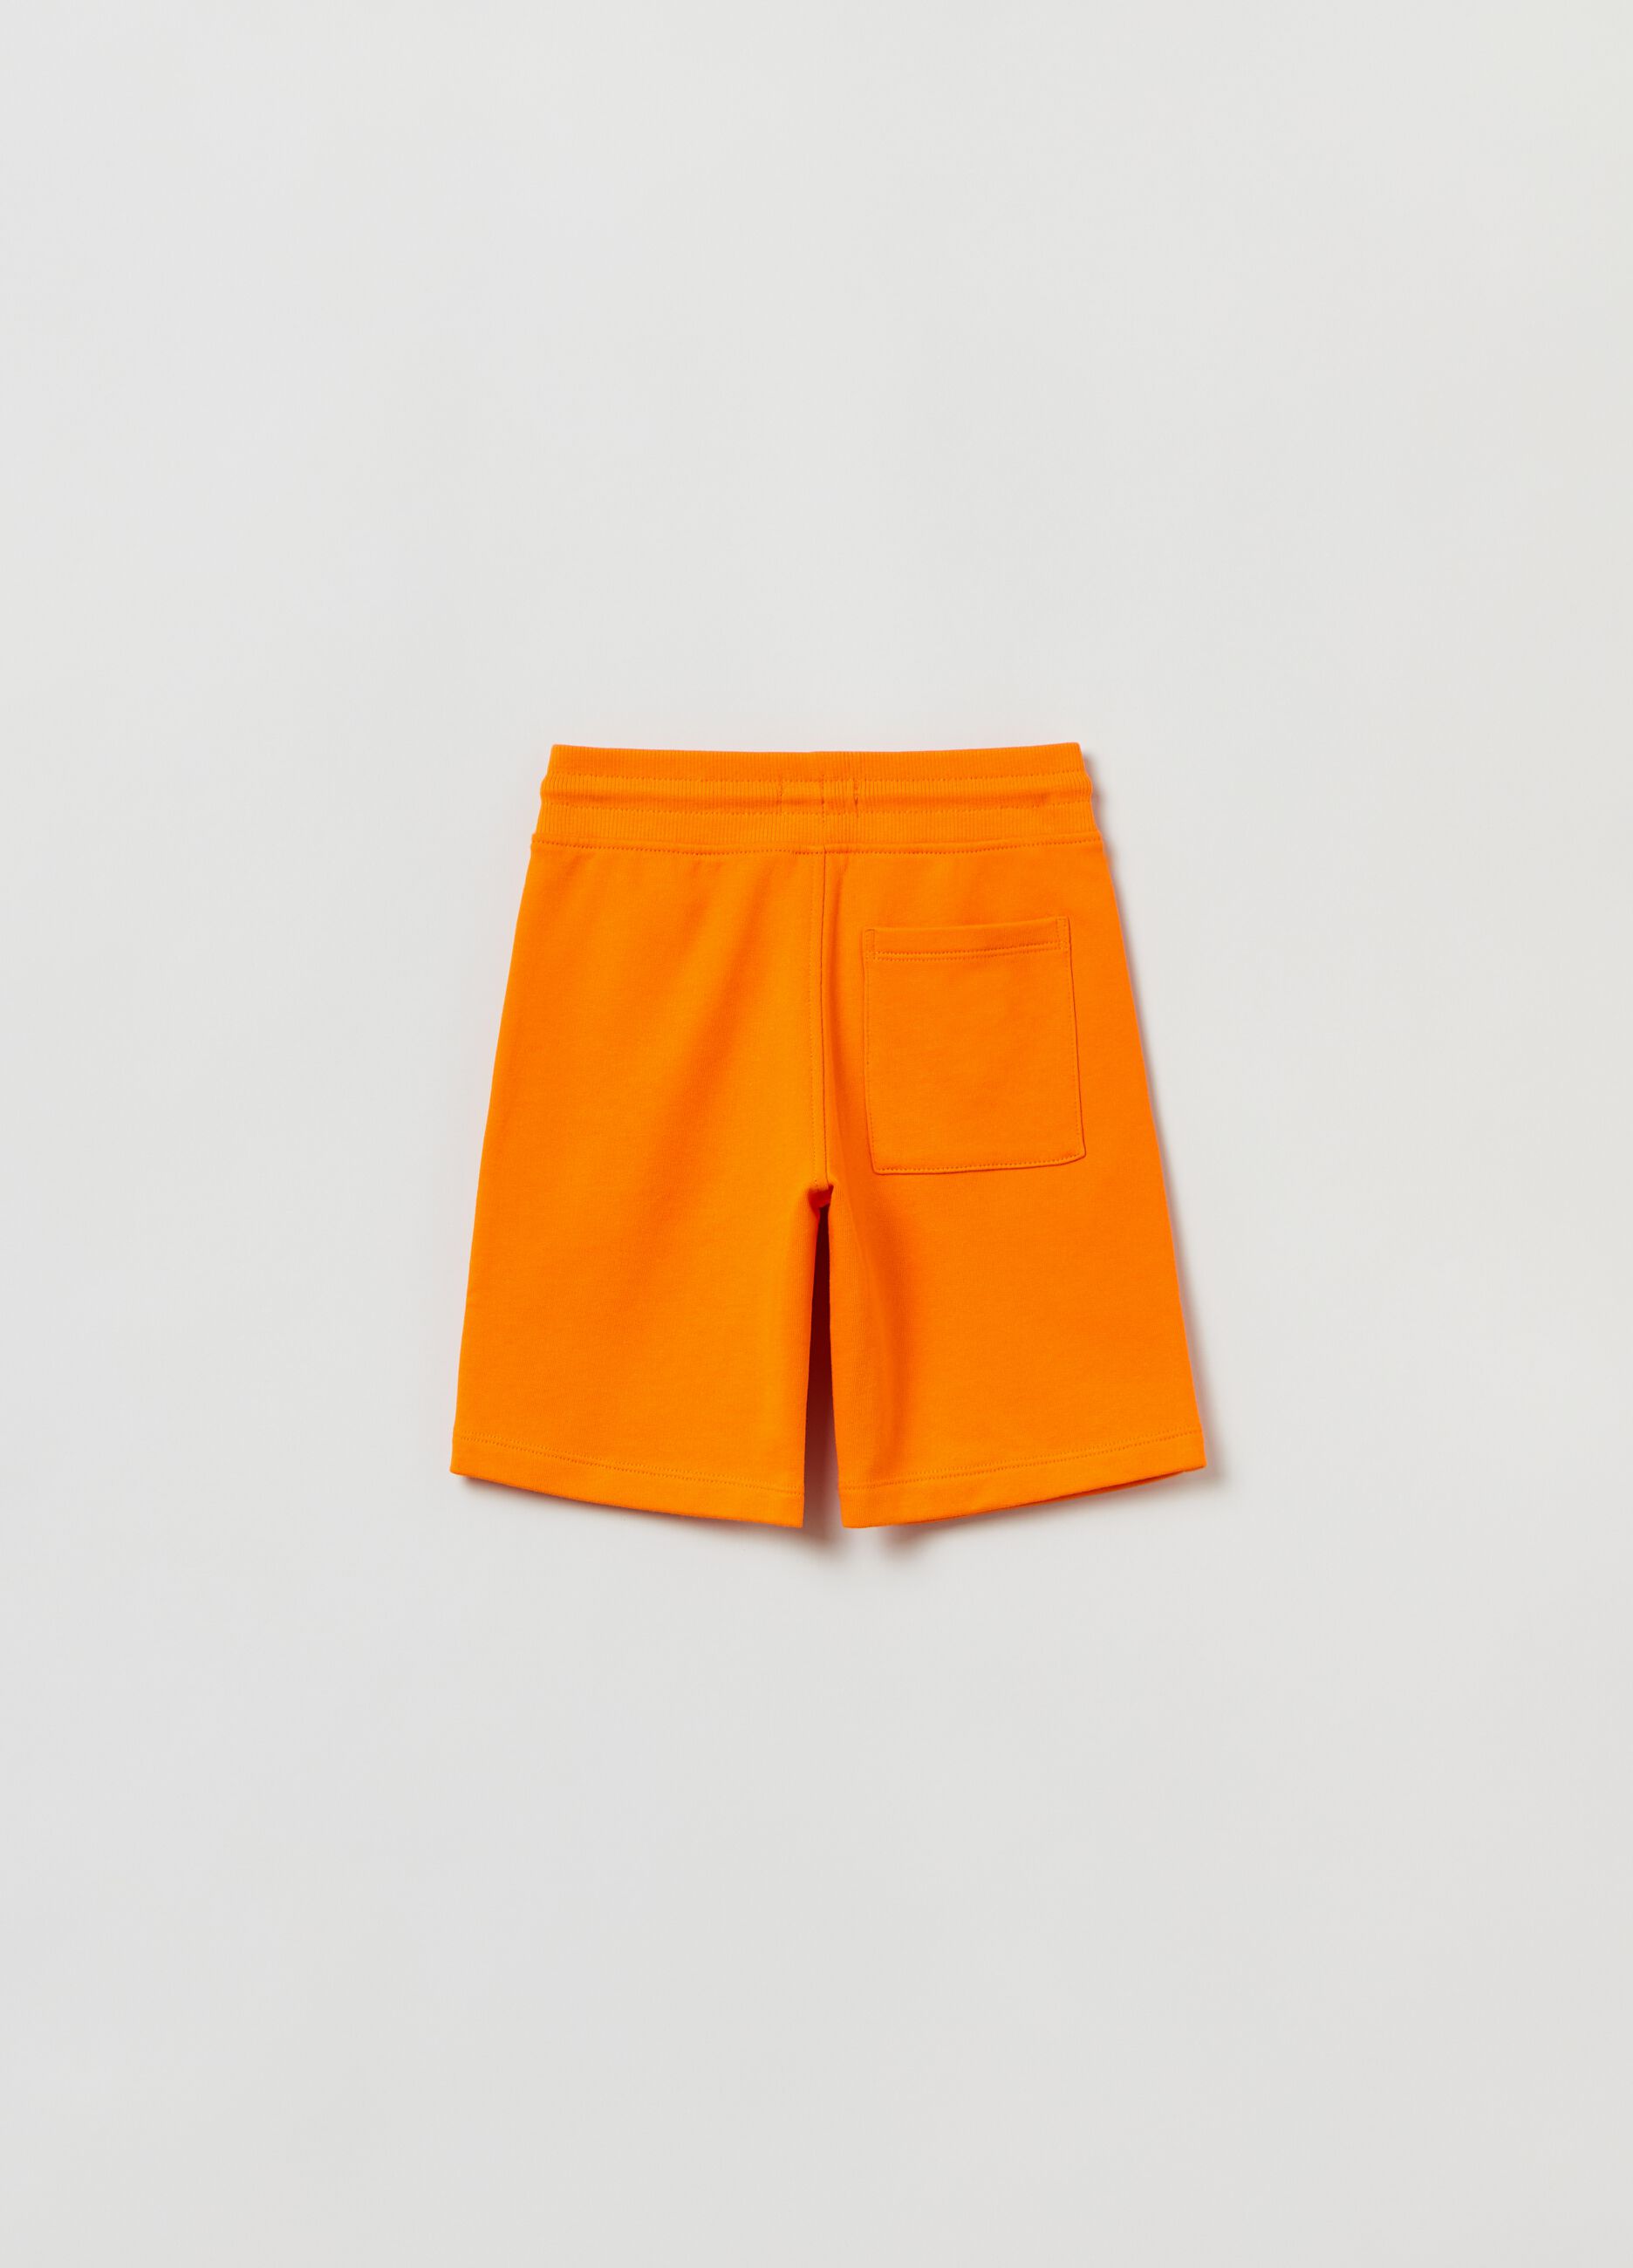 Fitness shorts in cotton with drawstring